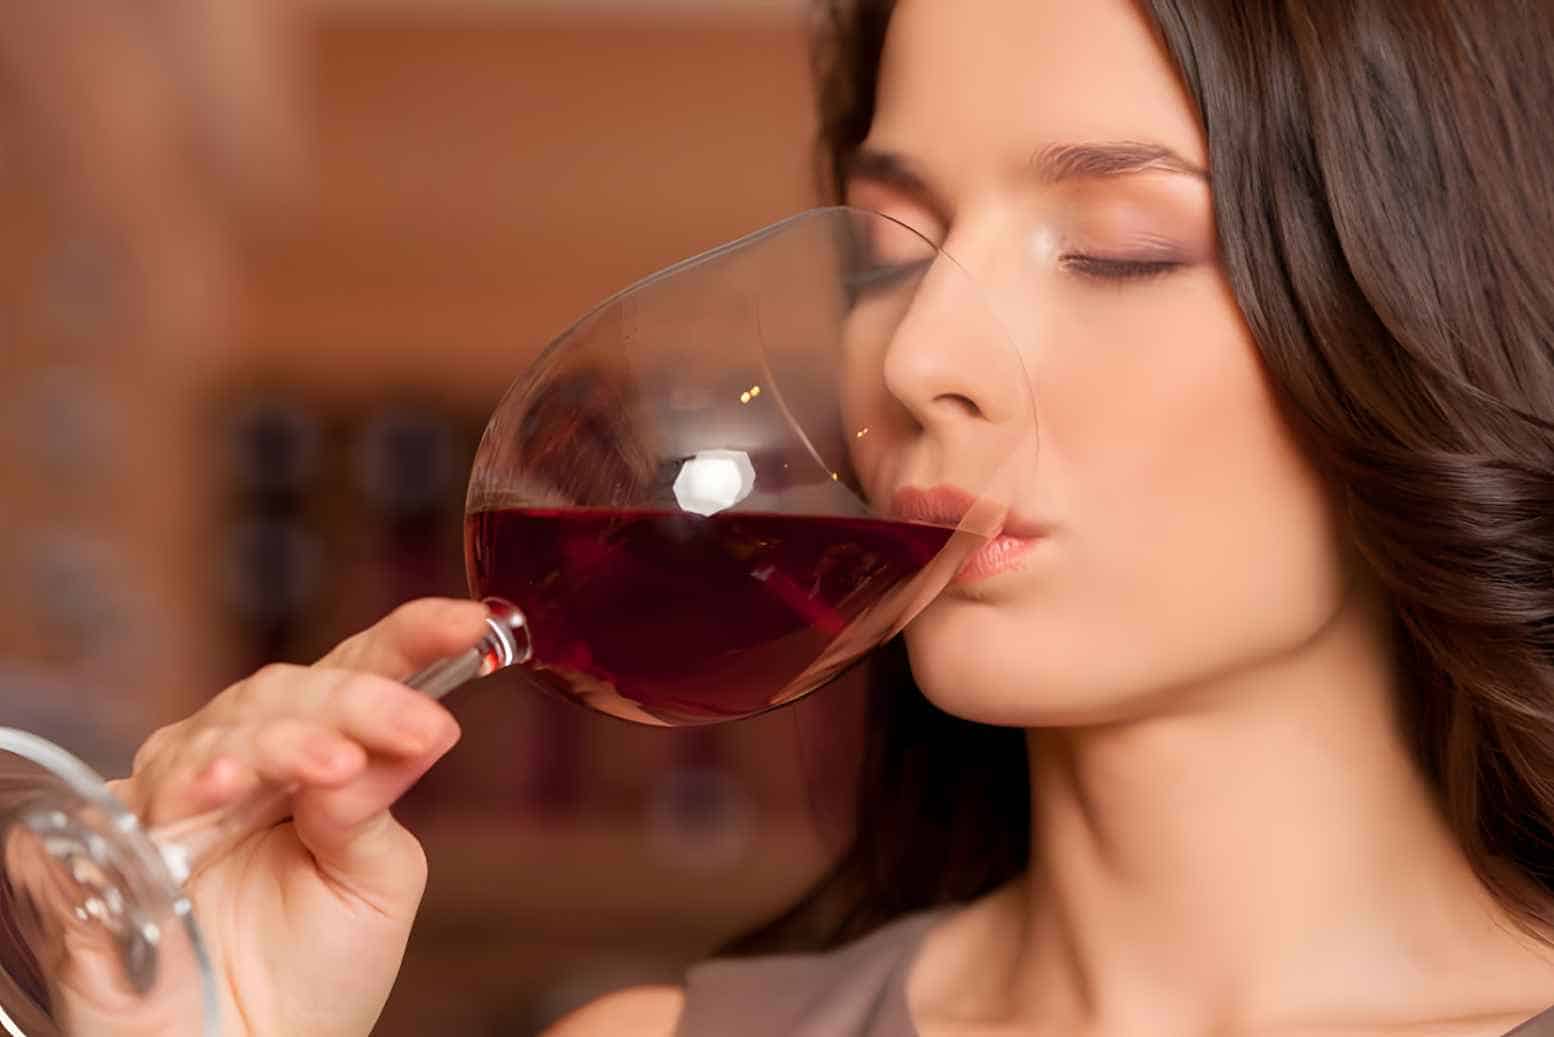 What are the benefits I can get from tannins